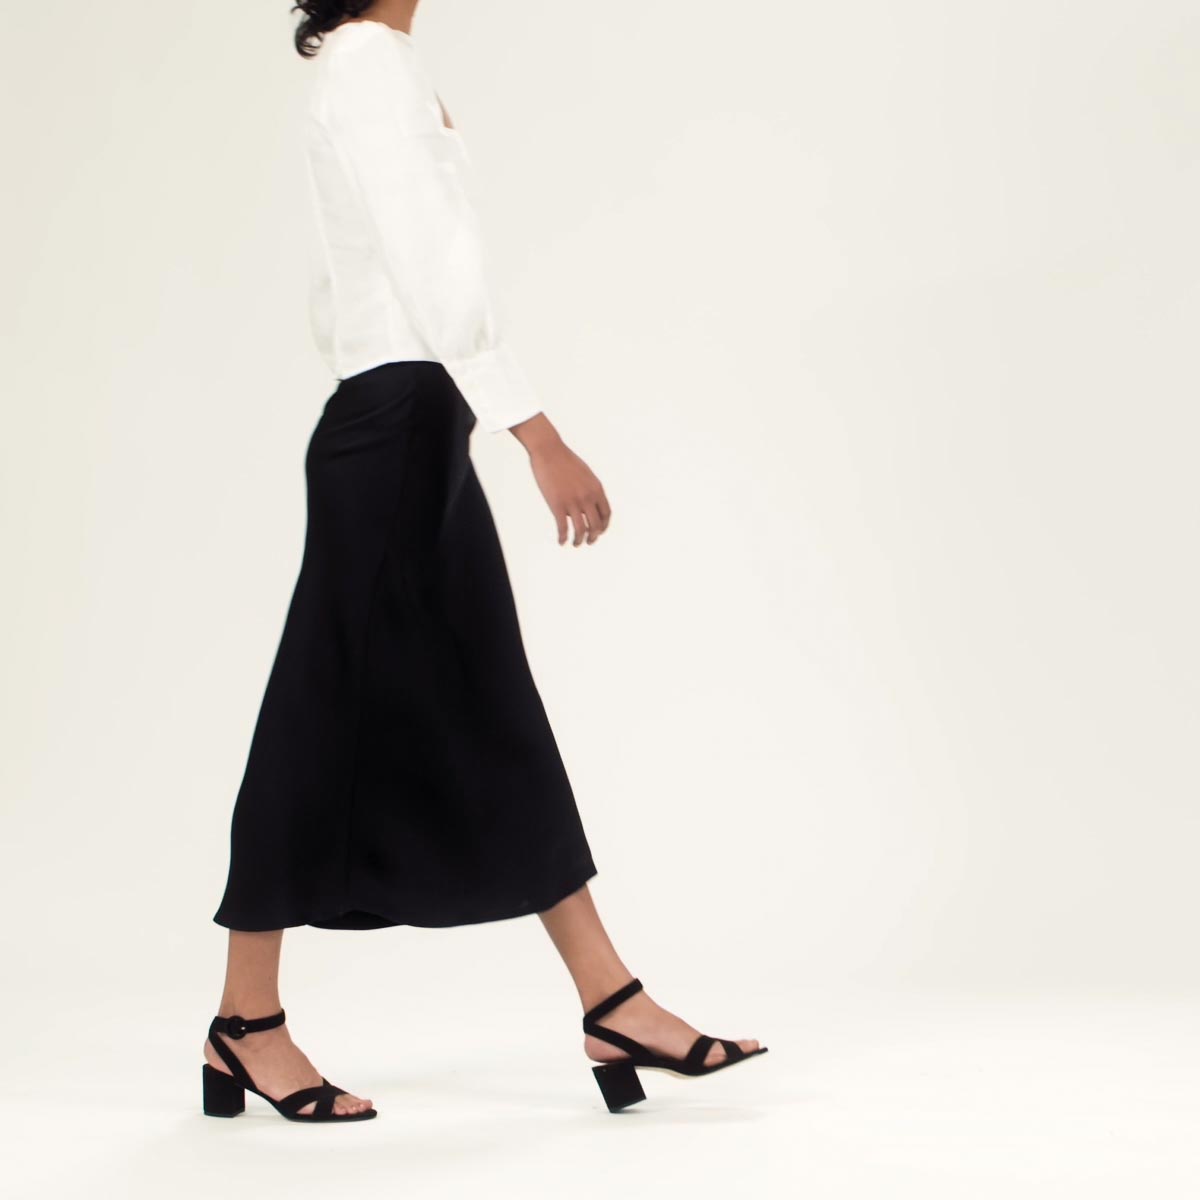 The City Sandal in Black Suede shown on model styled with a black midi skirt and a white long sleeve blouse with a square neck.